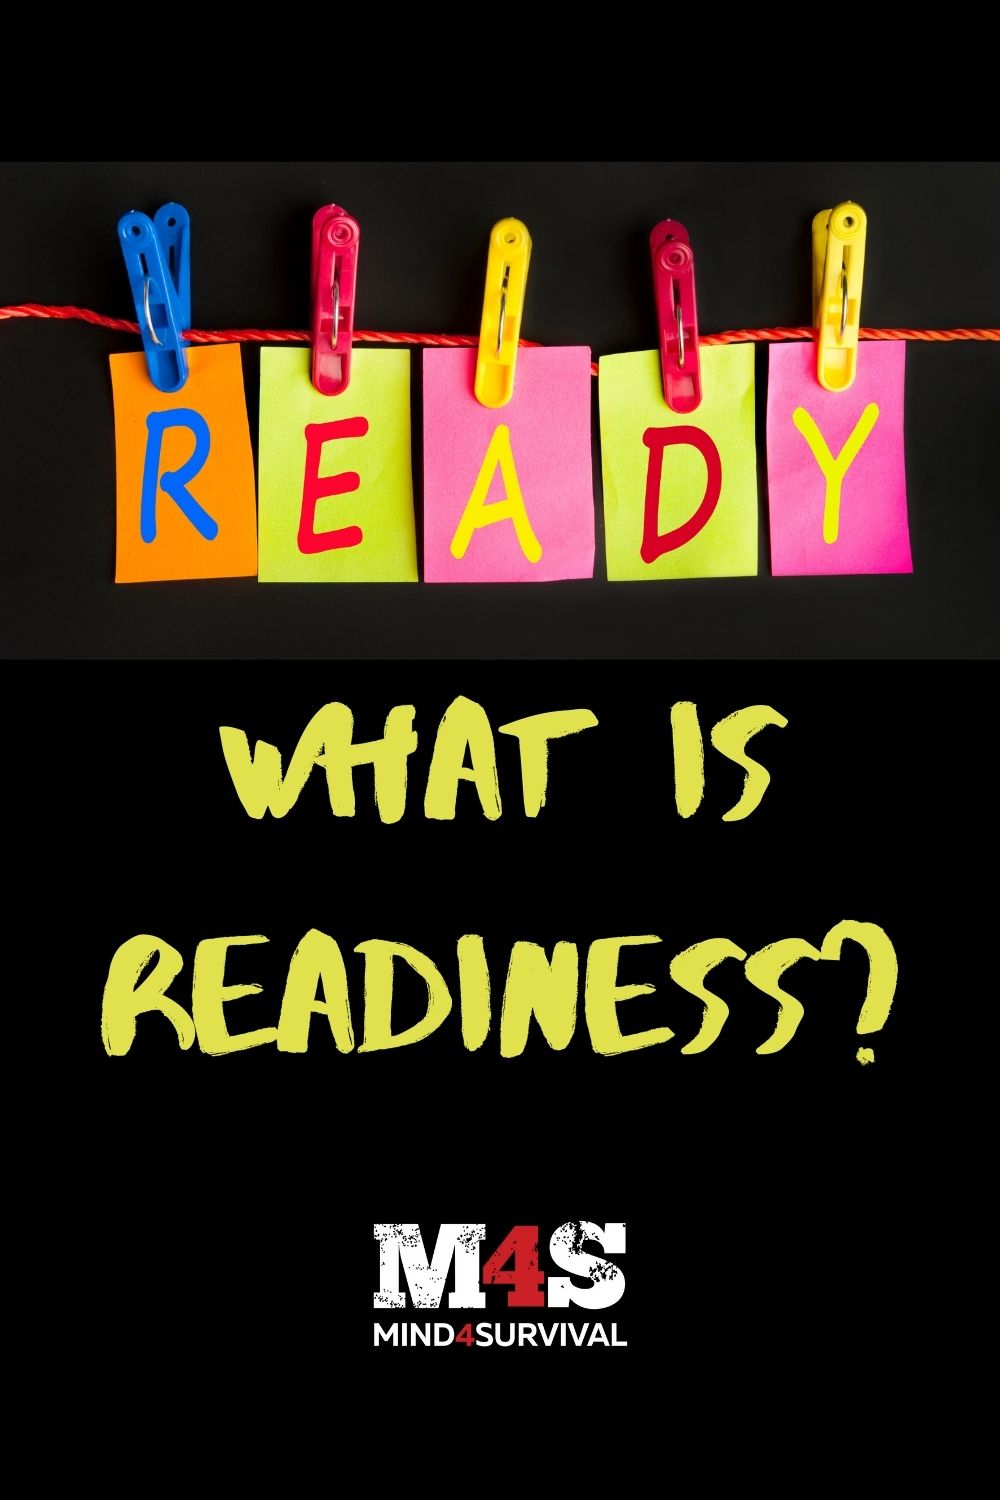 What Is Readiness? A Calm, Rational, Prepared State of Mind